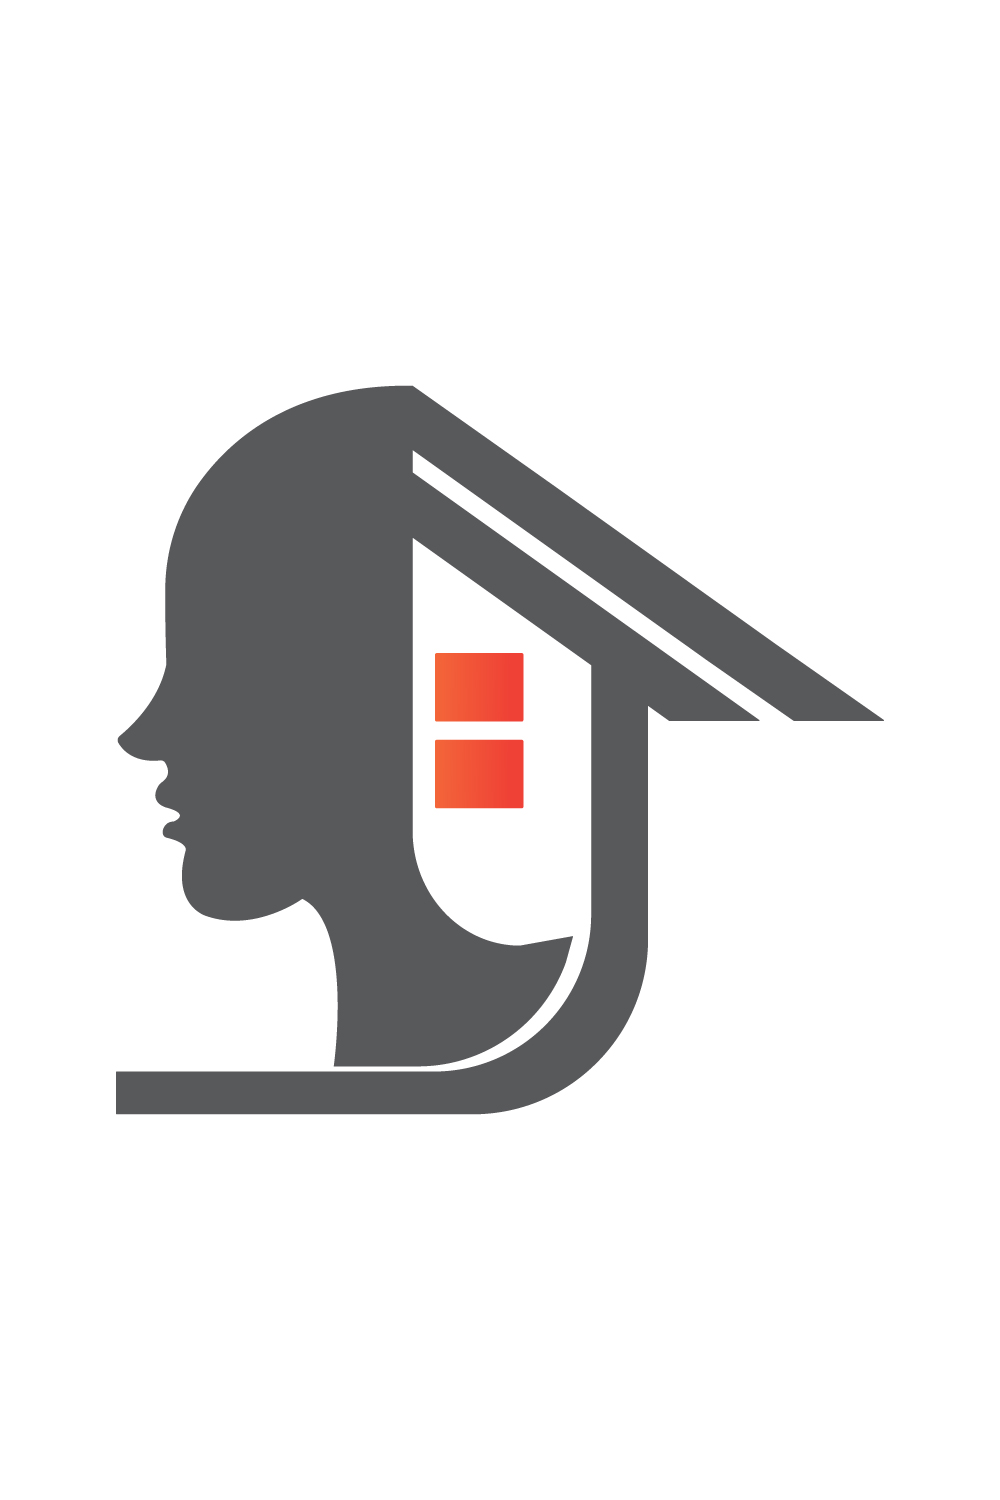 Human Head With Empty Home logo vector template icon illustration Head logo design House logo design pinterest preview image.